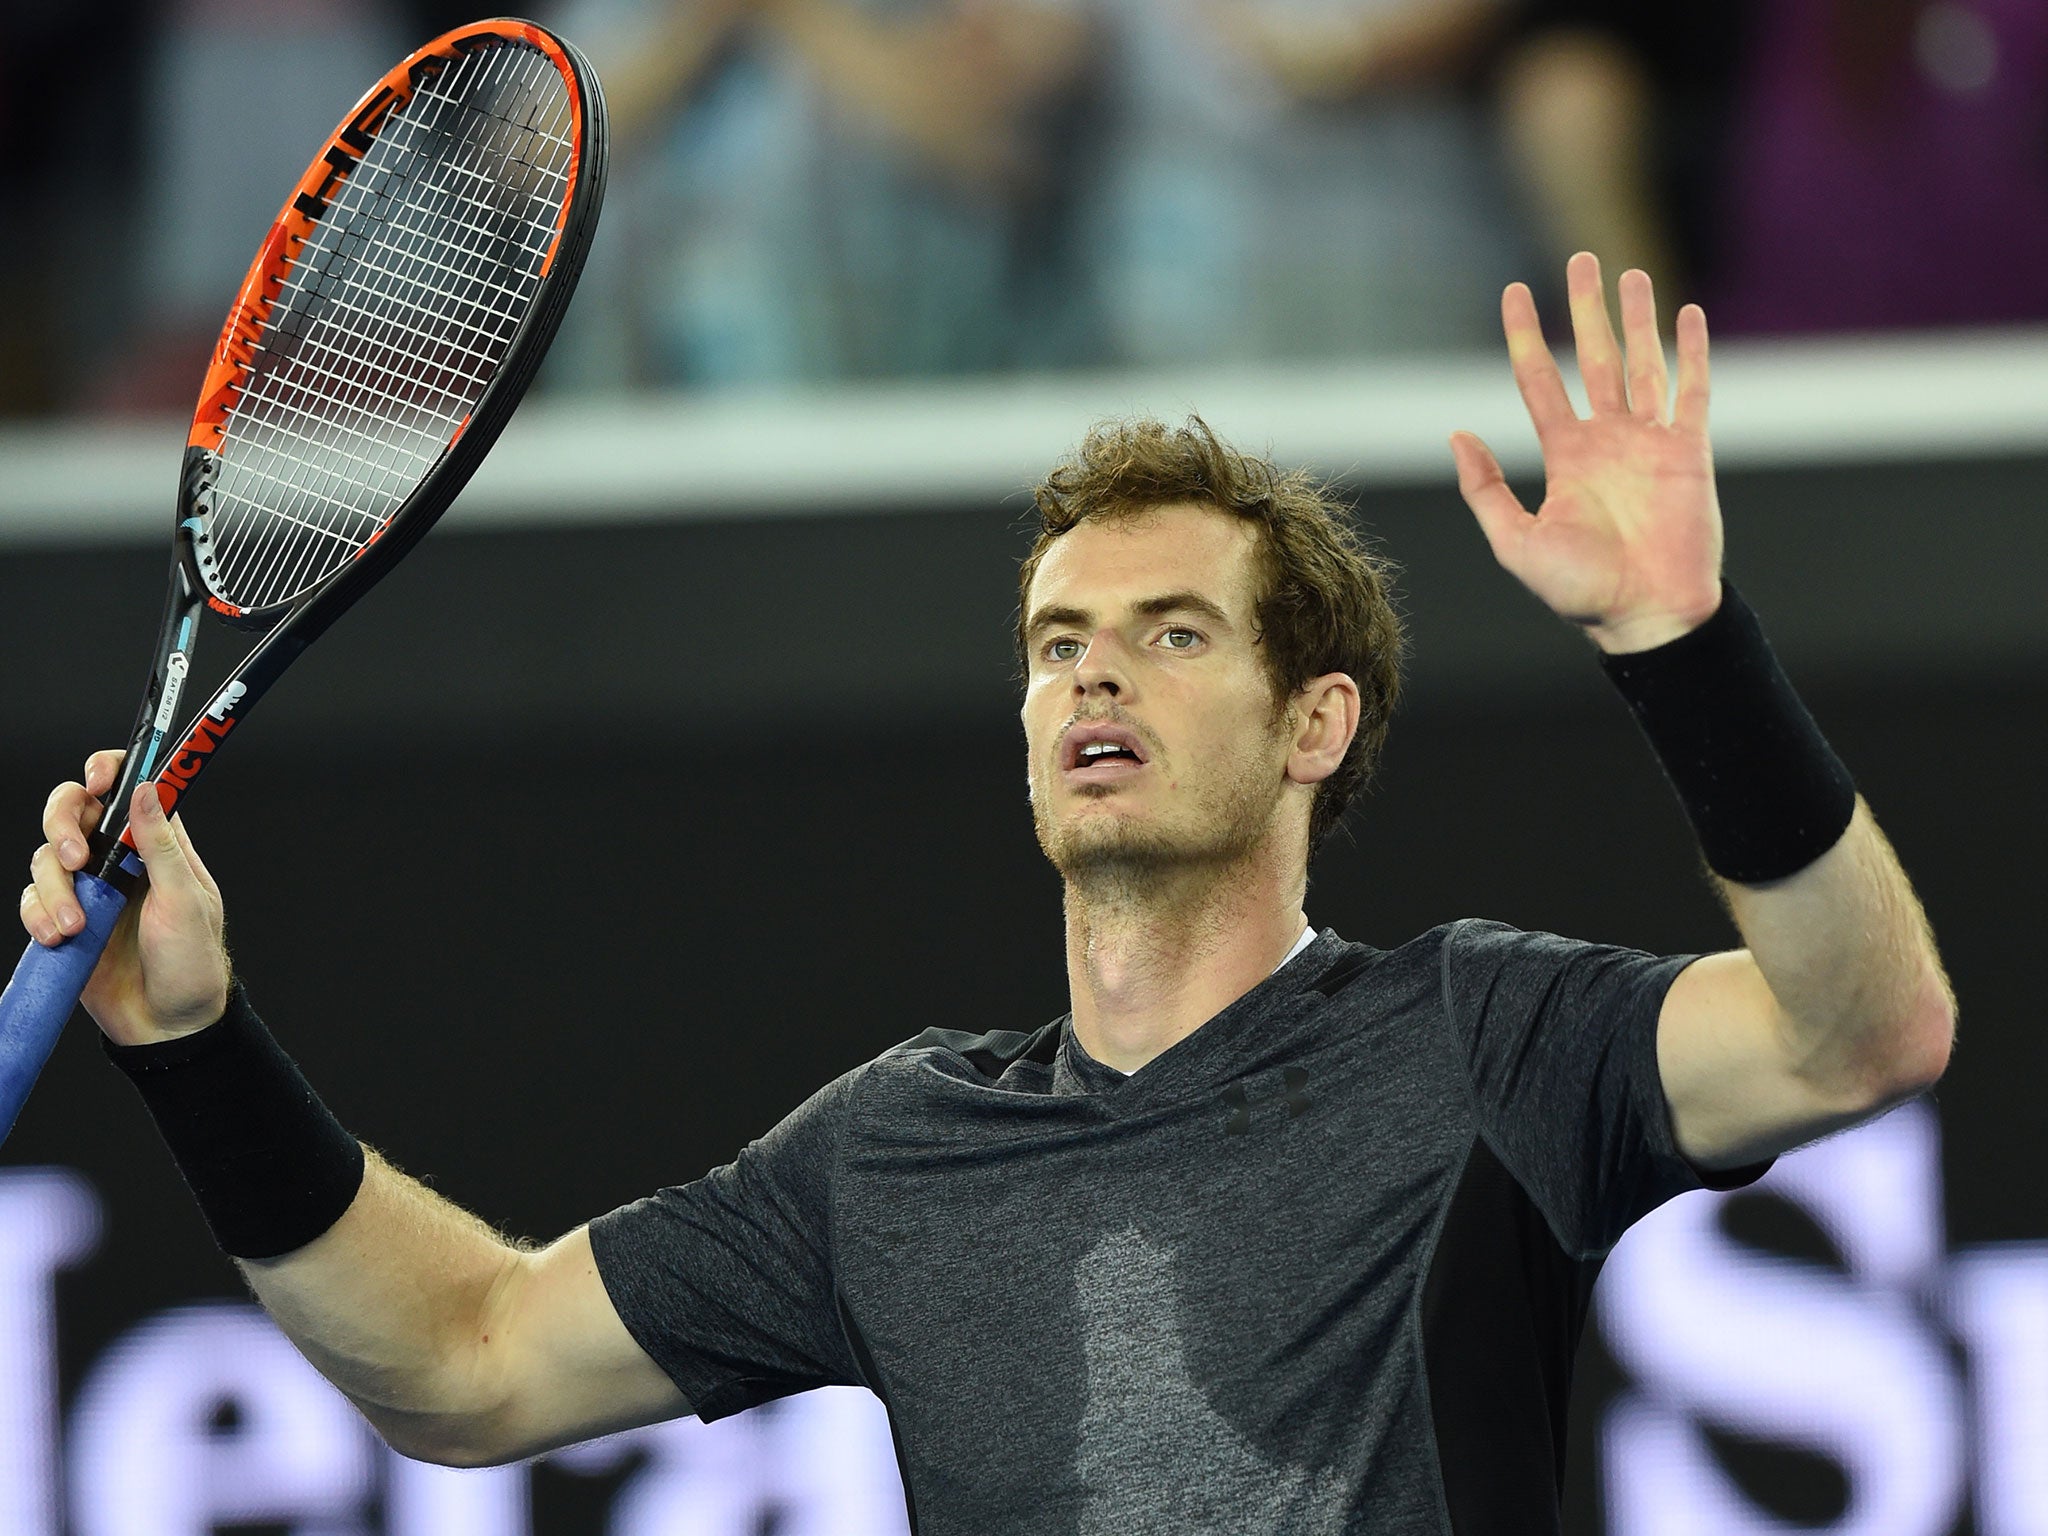 Andy Murray celebrates his victory over Joao Sousa